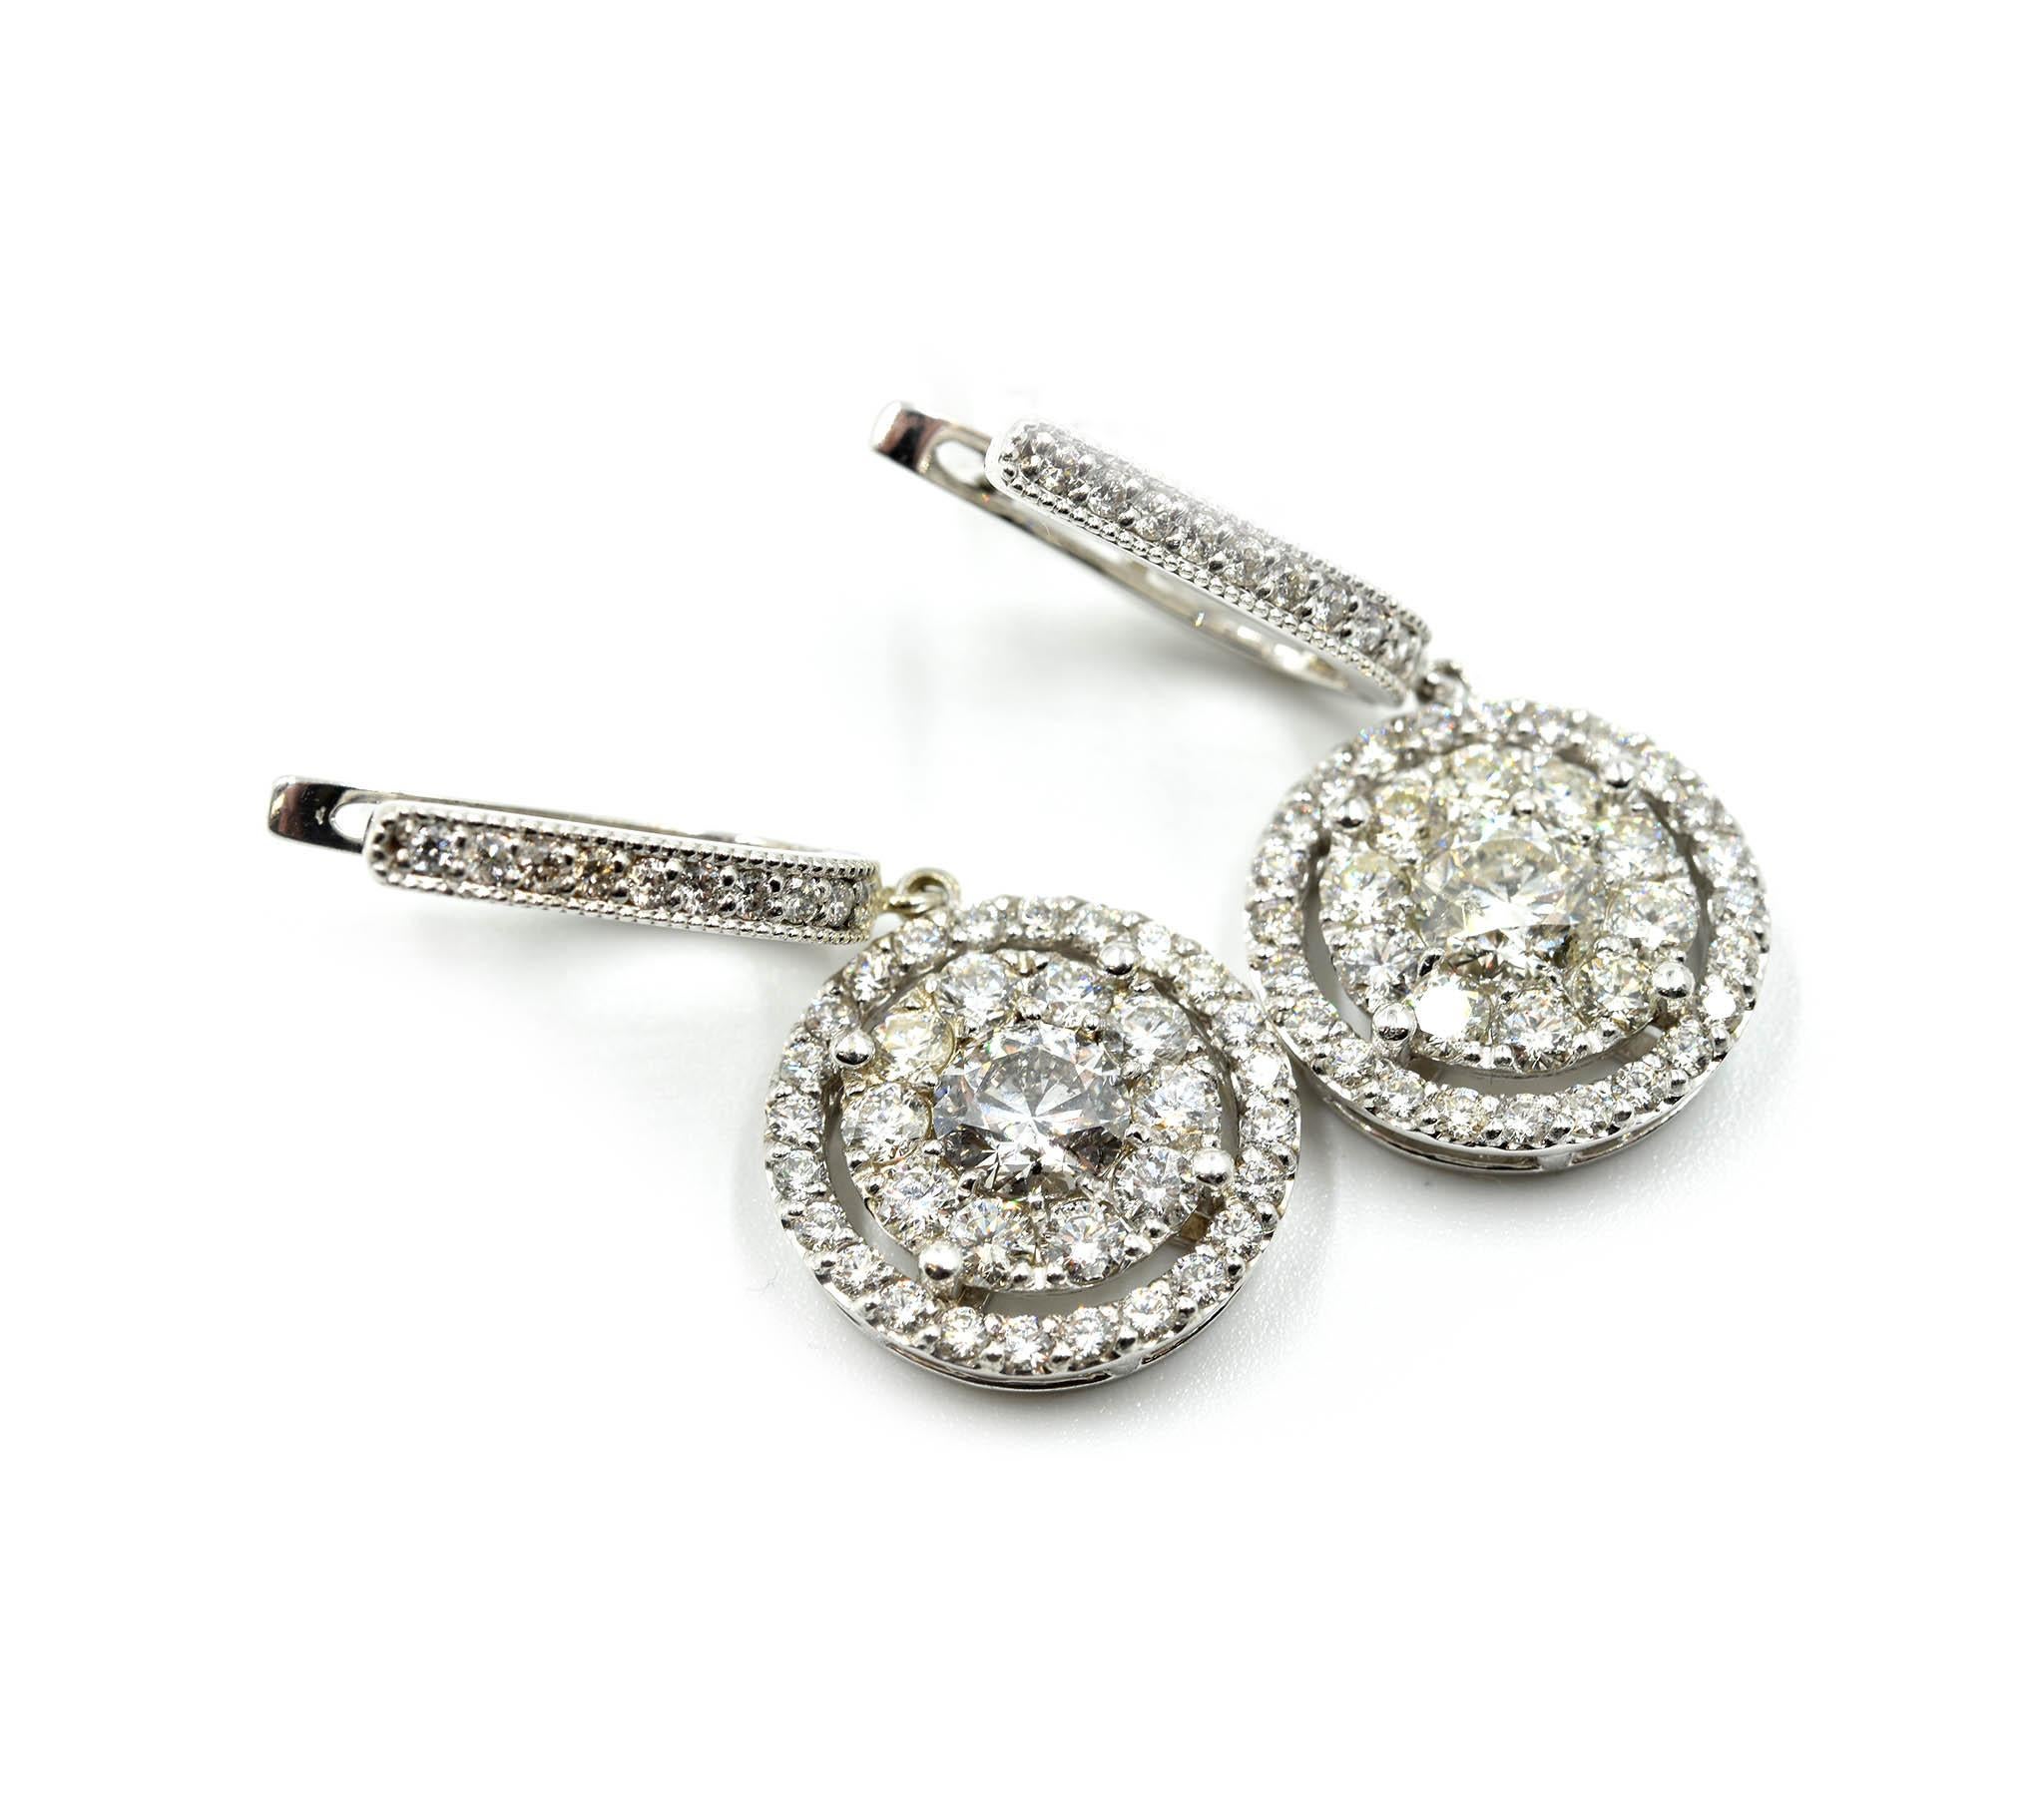 Designer: custom design
Material: 14k white gold
Diamonds: 92 round brilliants = 4.44 carat total weight
Dimensions: each earring dangles 1 ½ an inch and the cluster measures 3/4th an inch in diameter
Fastenings: snap closures
Weight: 9.50 grams
